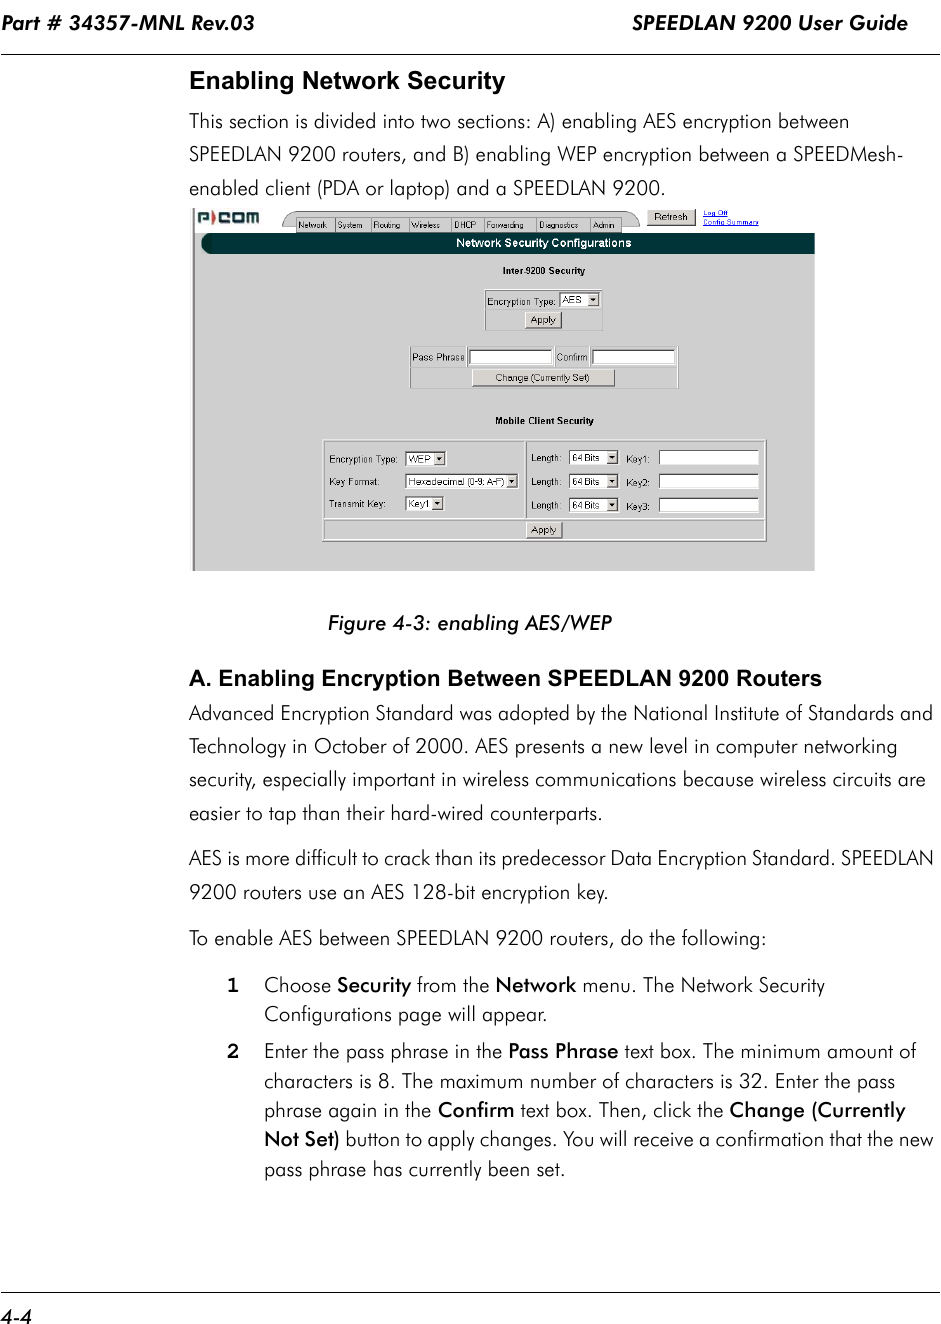 Part # 34357-MNL Rev.03                                                             SPEEDLAN 9200 User Guide 4-4Enabling Network SecurityThis section is divided into two sections: A) enabling AES encryption between SPEEDLAN 9200 routers, and B) enabling WEP encryption between a SPEEDMesh-enabled client (PDA or laptop) and a SPEEDLAN 9200. Figure 4-3: enabling AES/WEPA. Enabling Encryption Between SPEEDLAN 9200 RoutersAdvanced Encryption Standard was adopted by the National Institute of Standards and Technology in October of 2000. AES presents a new level in computer networking security, especially important in wireless communications because wireless circuits are easier to tap than their hard-wired counterparts.   AES is more difficult to crack than its predecessor Data Encryption Standard. SPEEDLAN 9200 routers use an AES 128-bit encryption key.To enable AES between SPEEDLAN 9200 routers, do the following:1Choose Security from the Network menu. The Network Security Configurations page will appear. 2Enter the pass phrase in the Pass Phrase text box. The minimum amount of characters is 8. The maximum number of characters is 32. Enter the pass phrase again in the Confirm text box. Then, click the Change (Currently Not Set) button to apply changes. You will receive a confirmation that the new pass phrase has currently been set. 